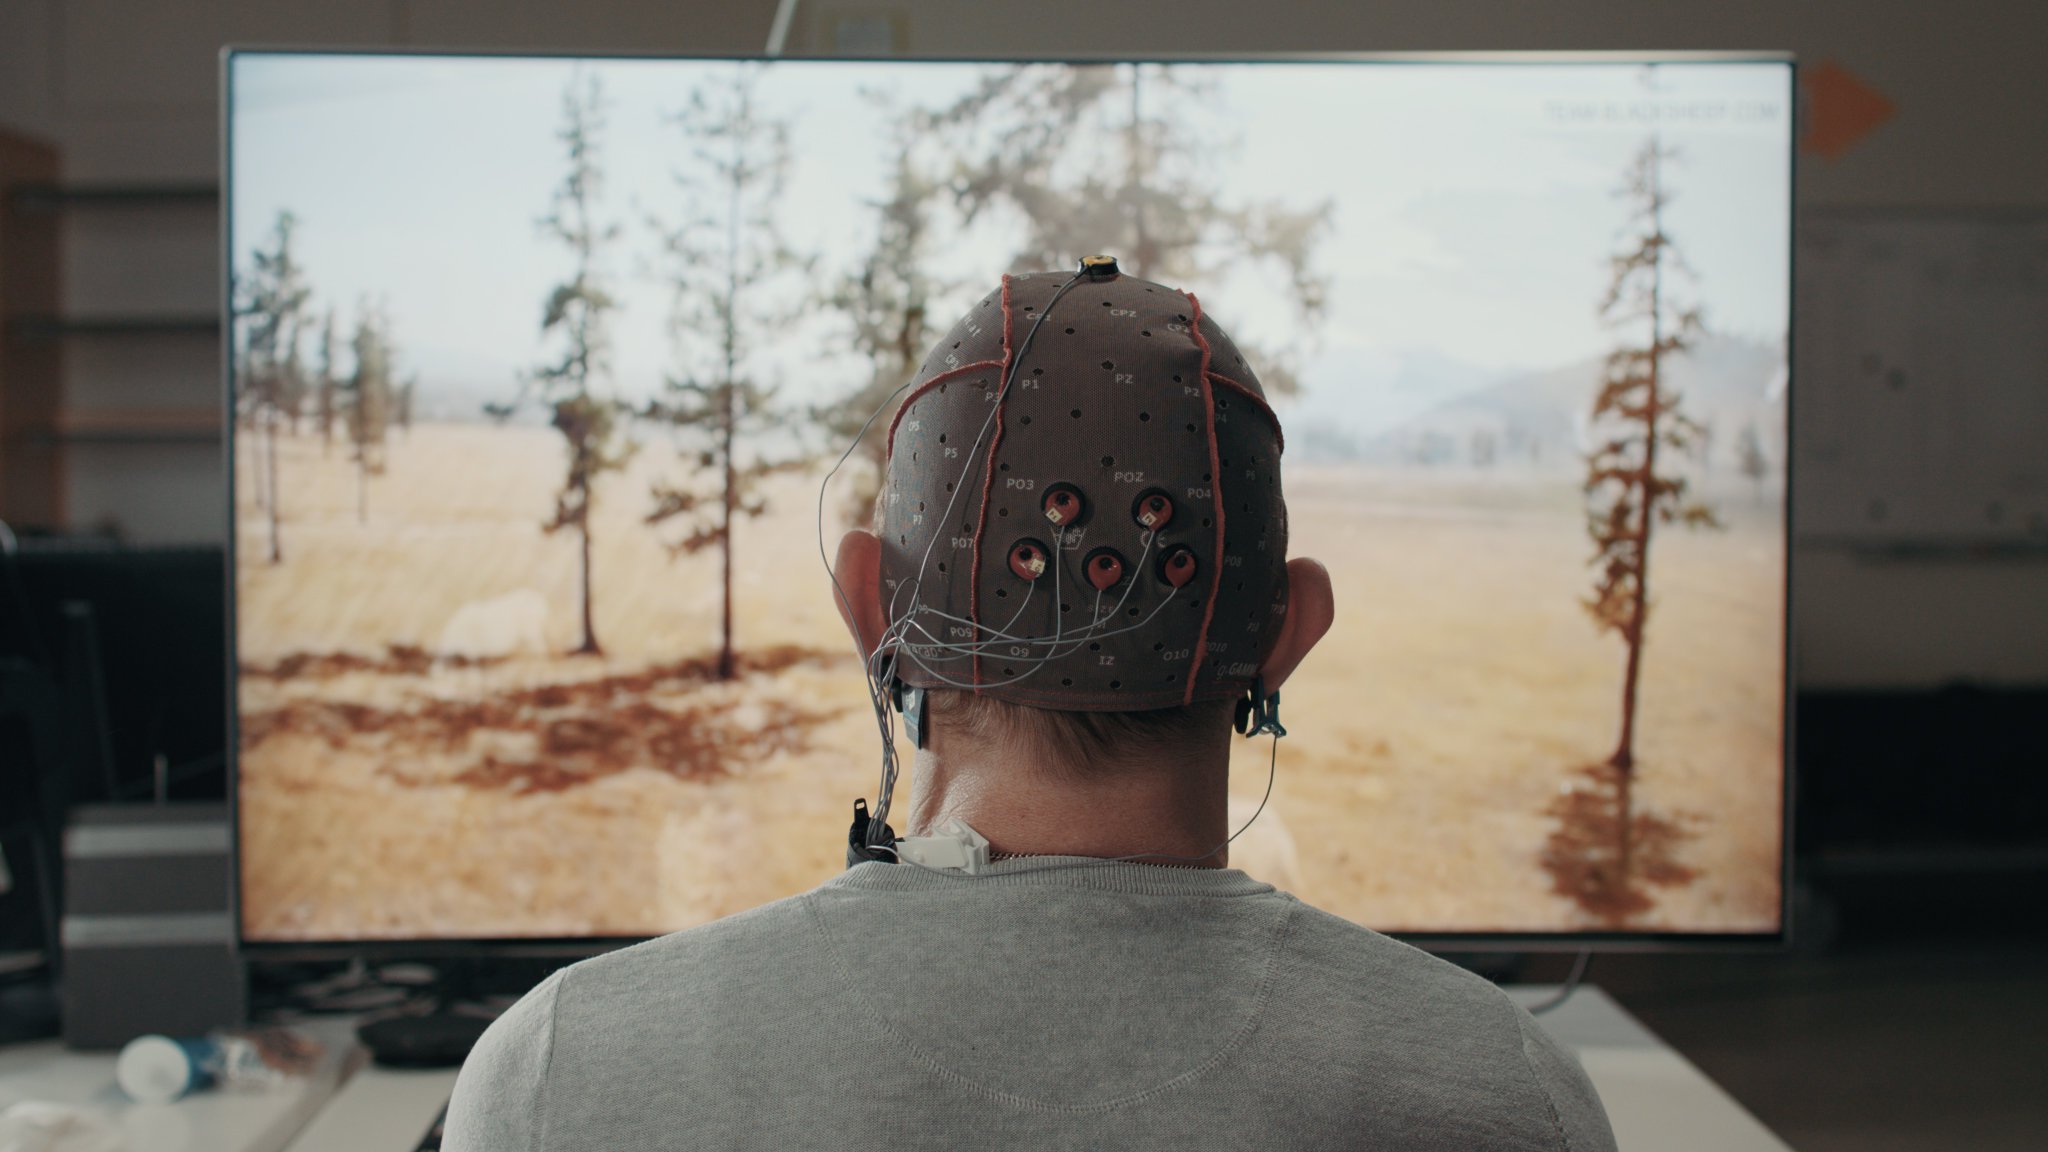 Meet the People Building the TV Controlled by Your Brain